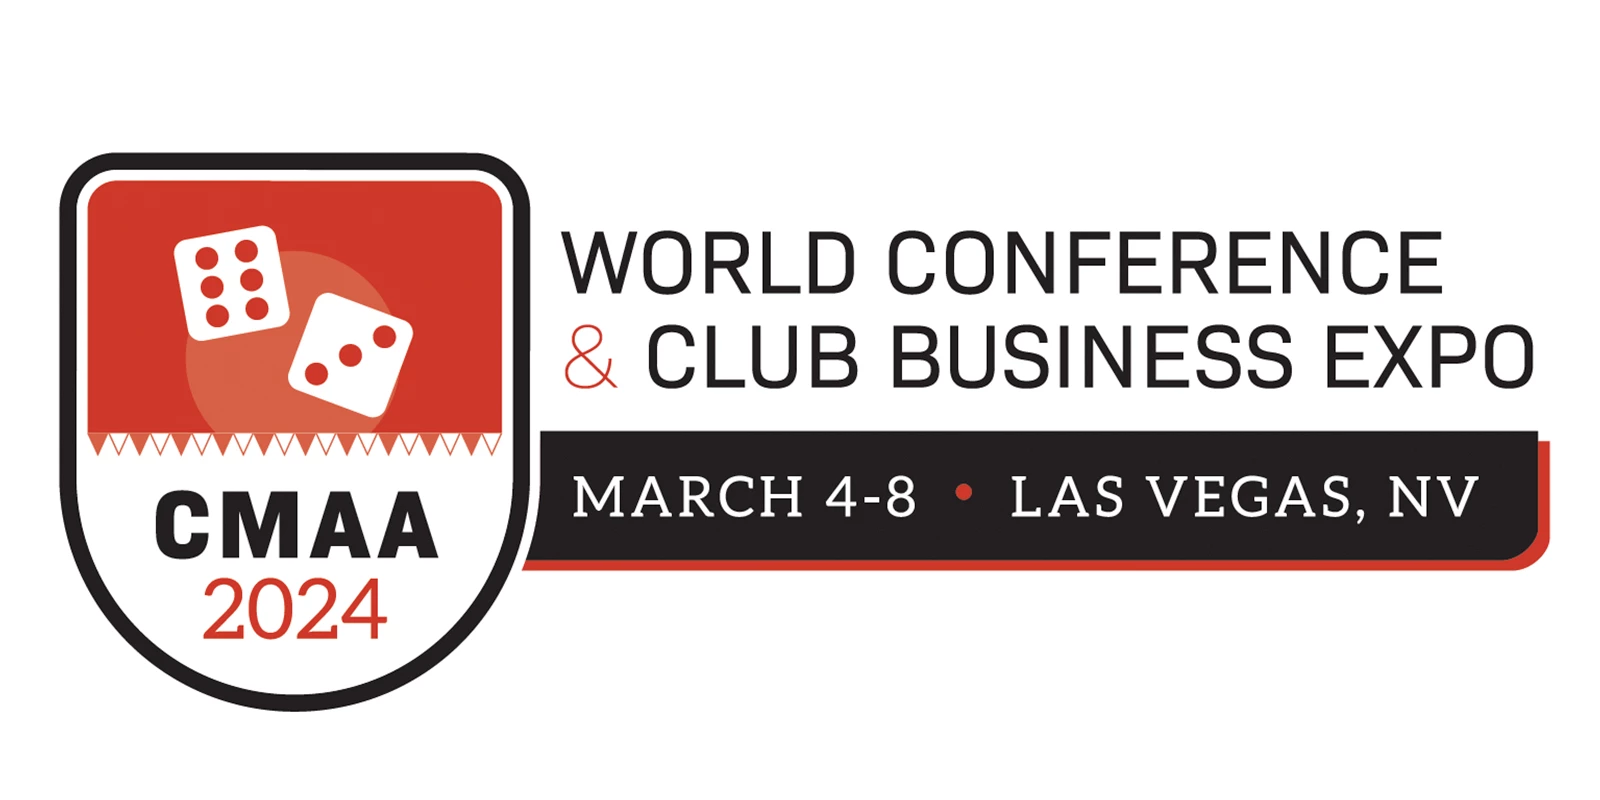 Education CMAA 2024 World Conference & Club Business Expo